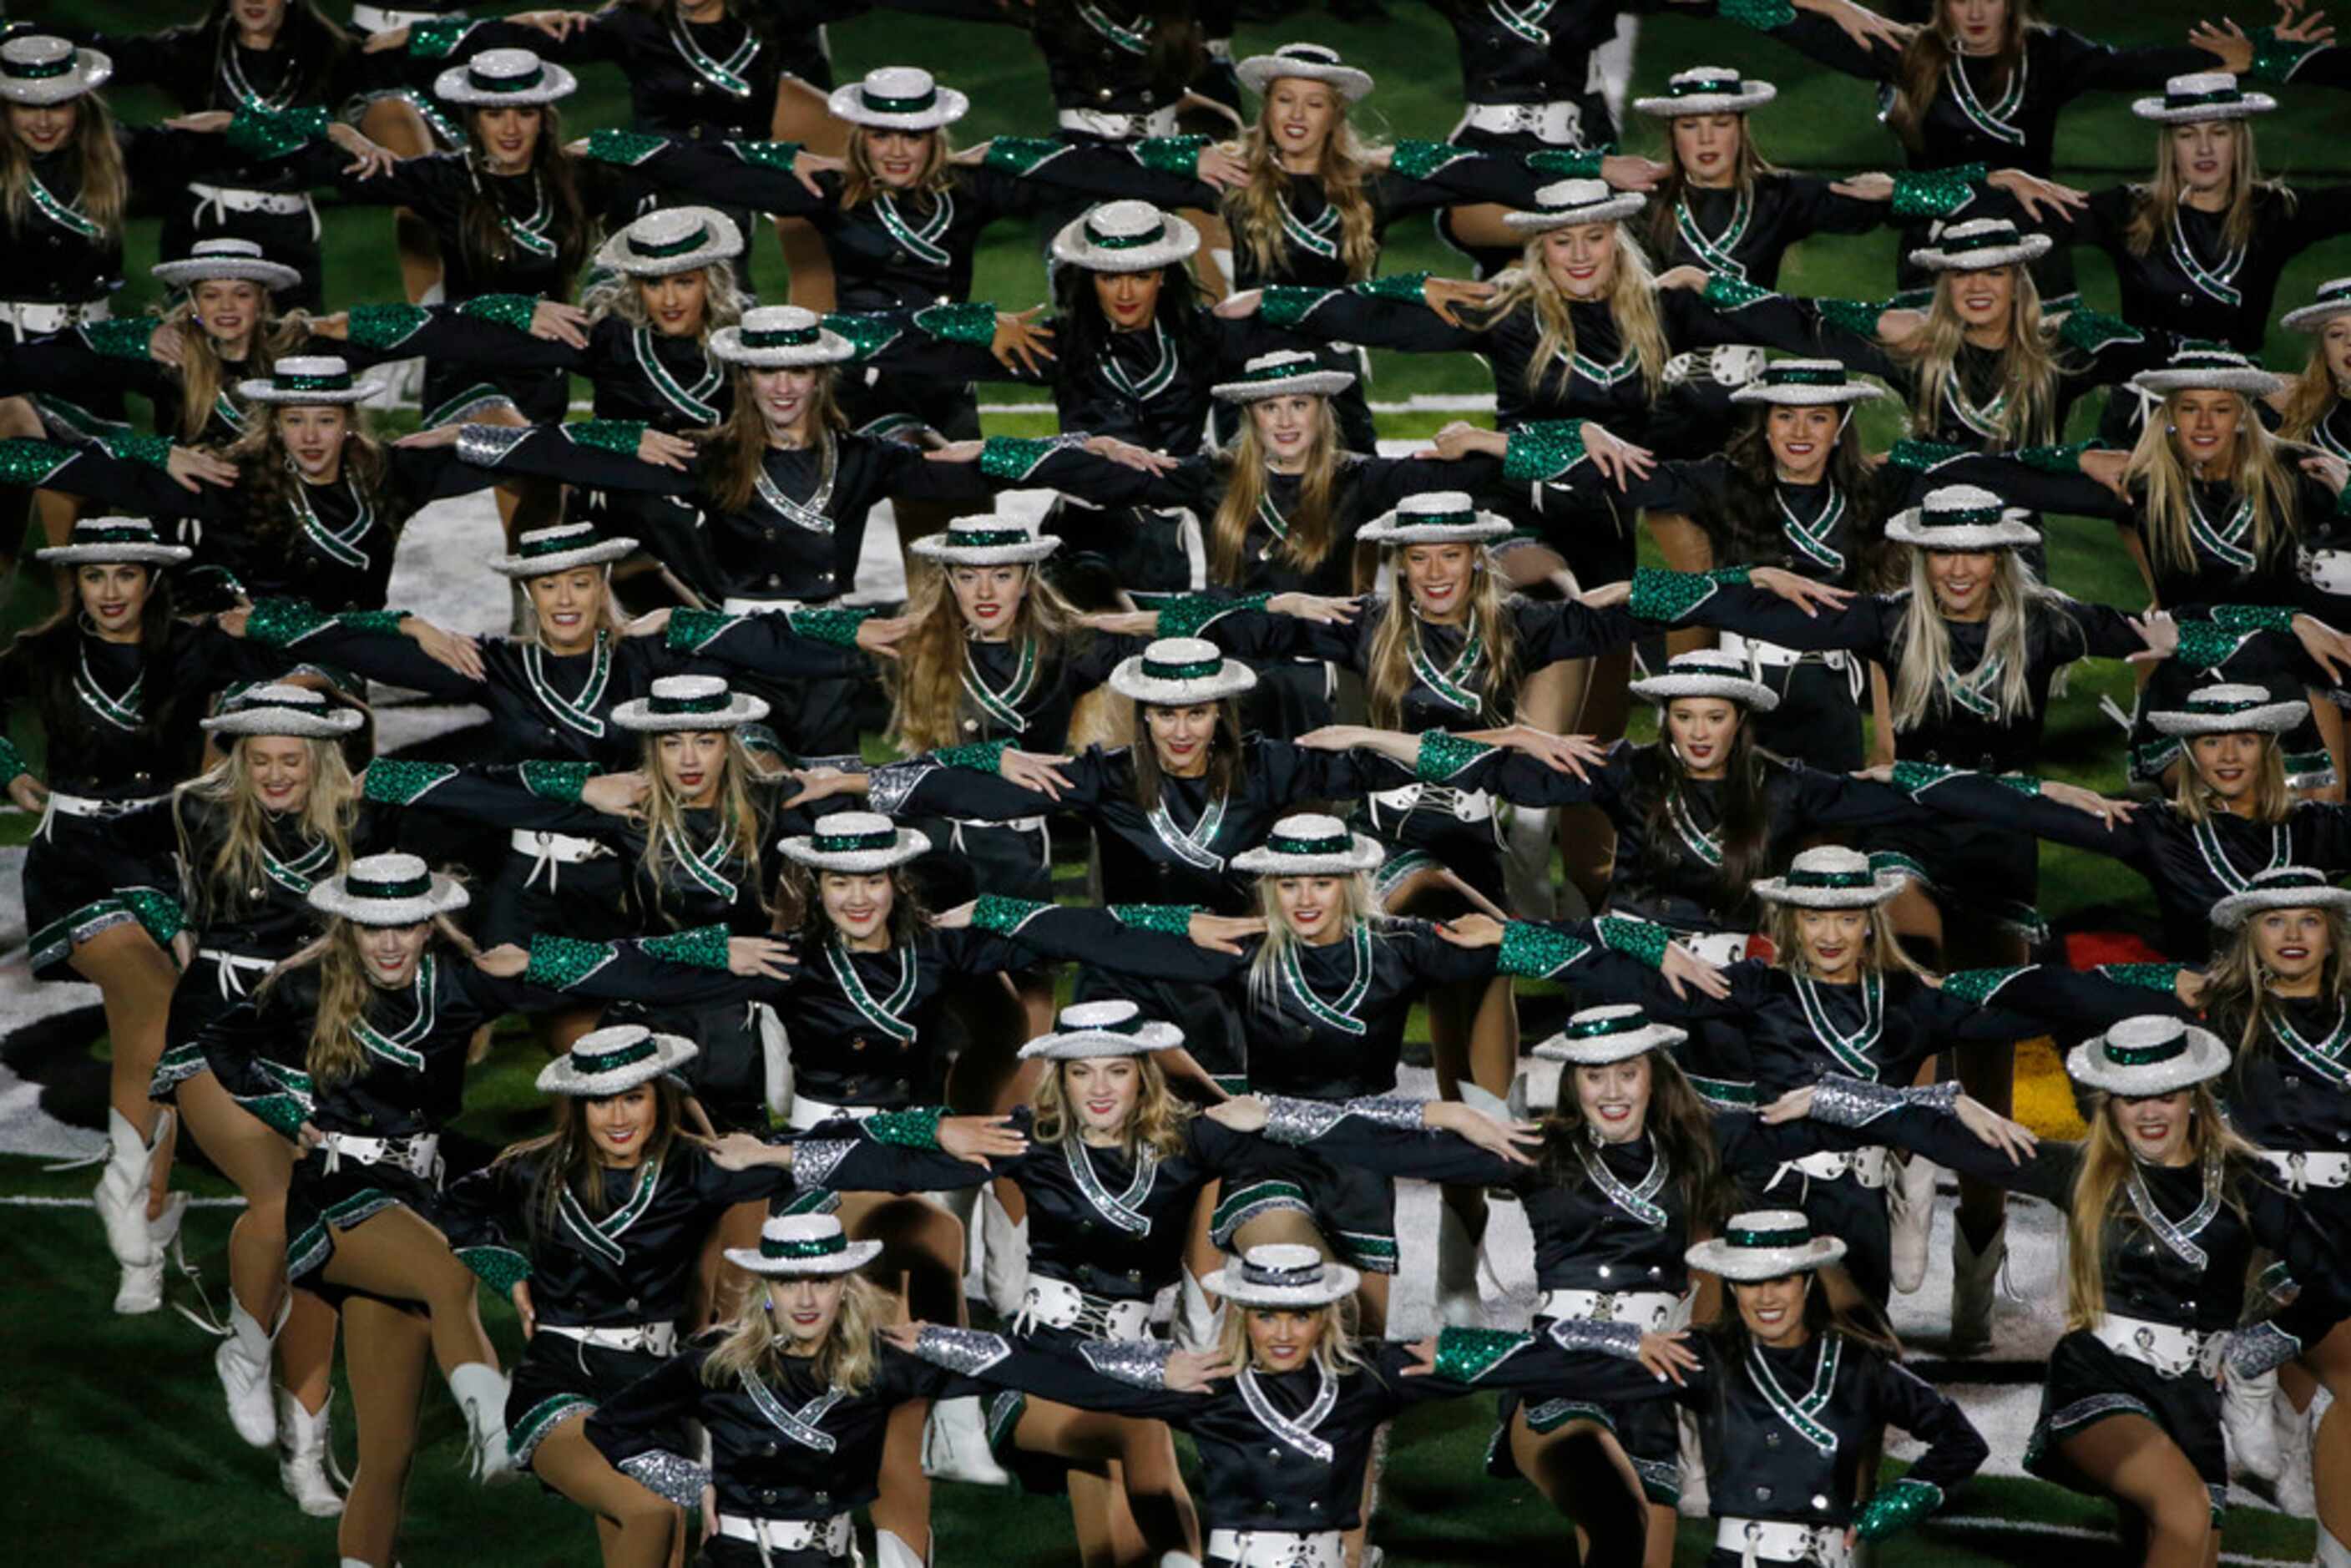 The Southlake Carroll Emerald Belles drill team performs at half time of their high school...